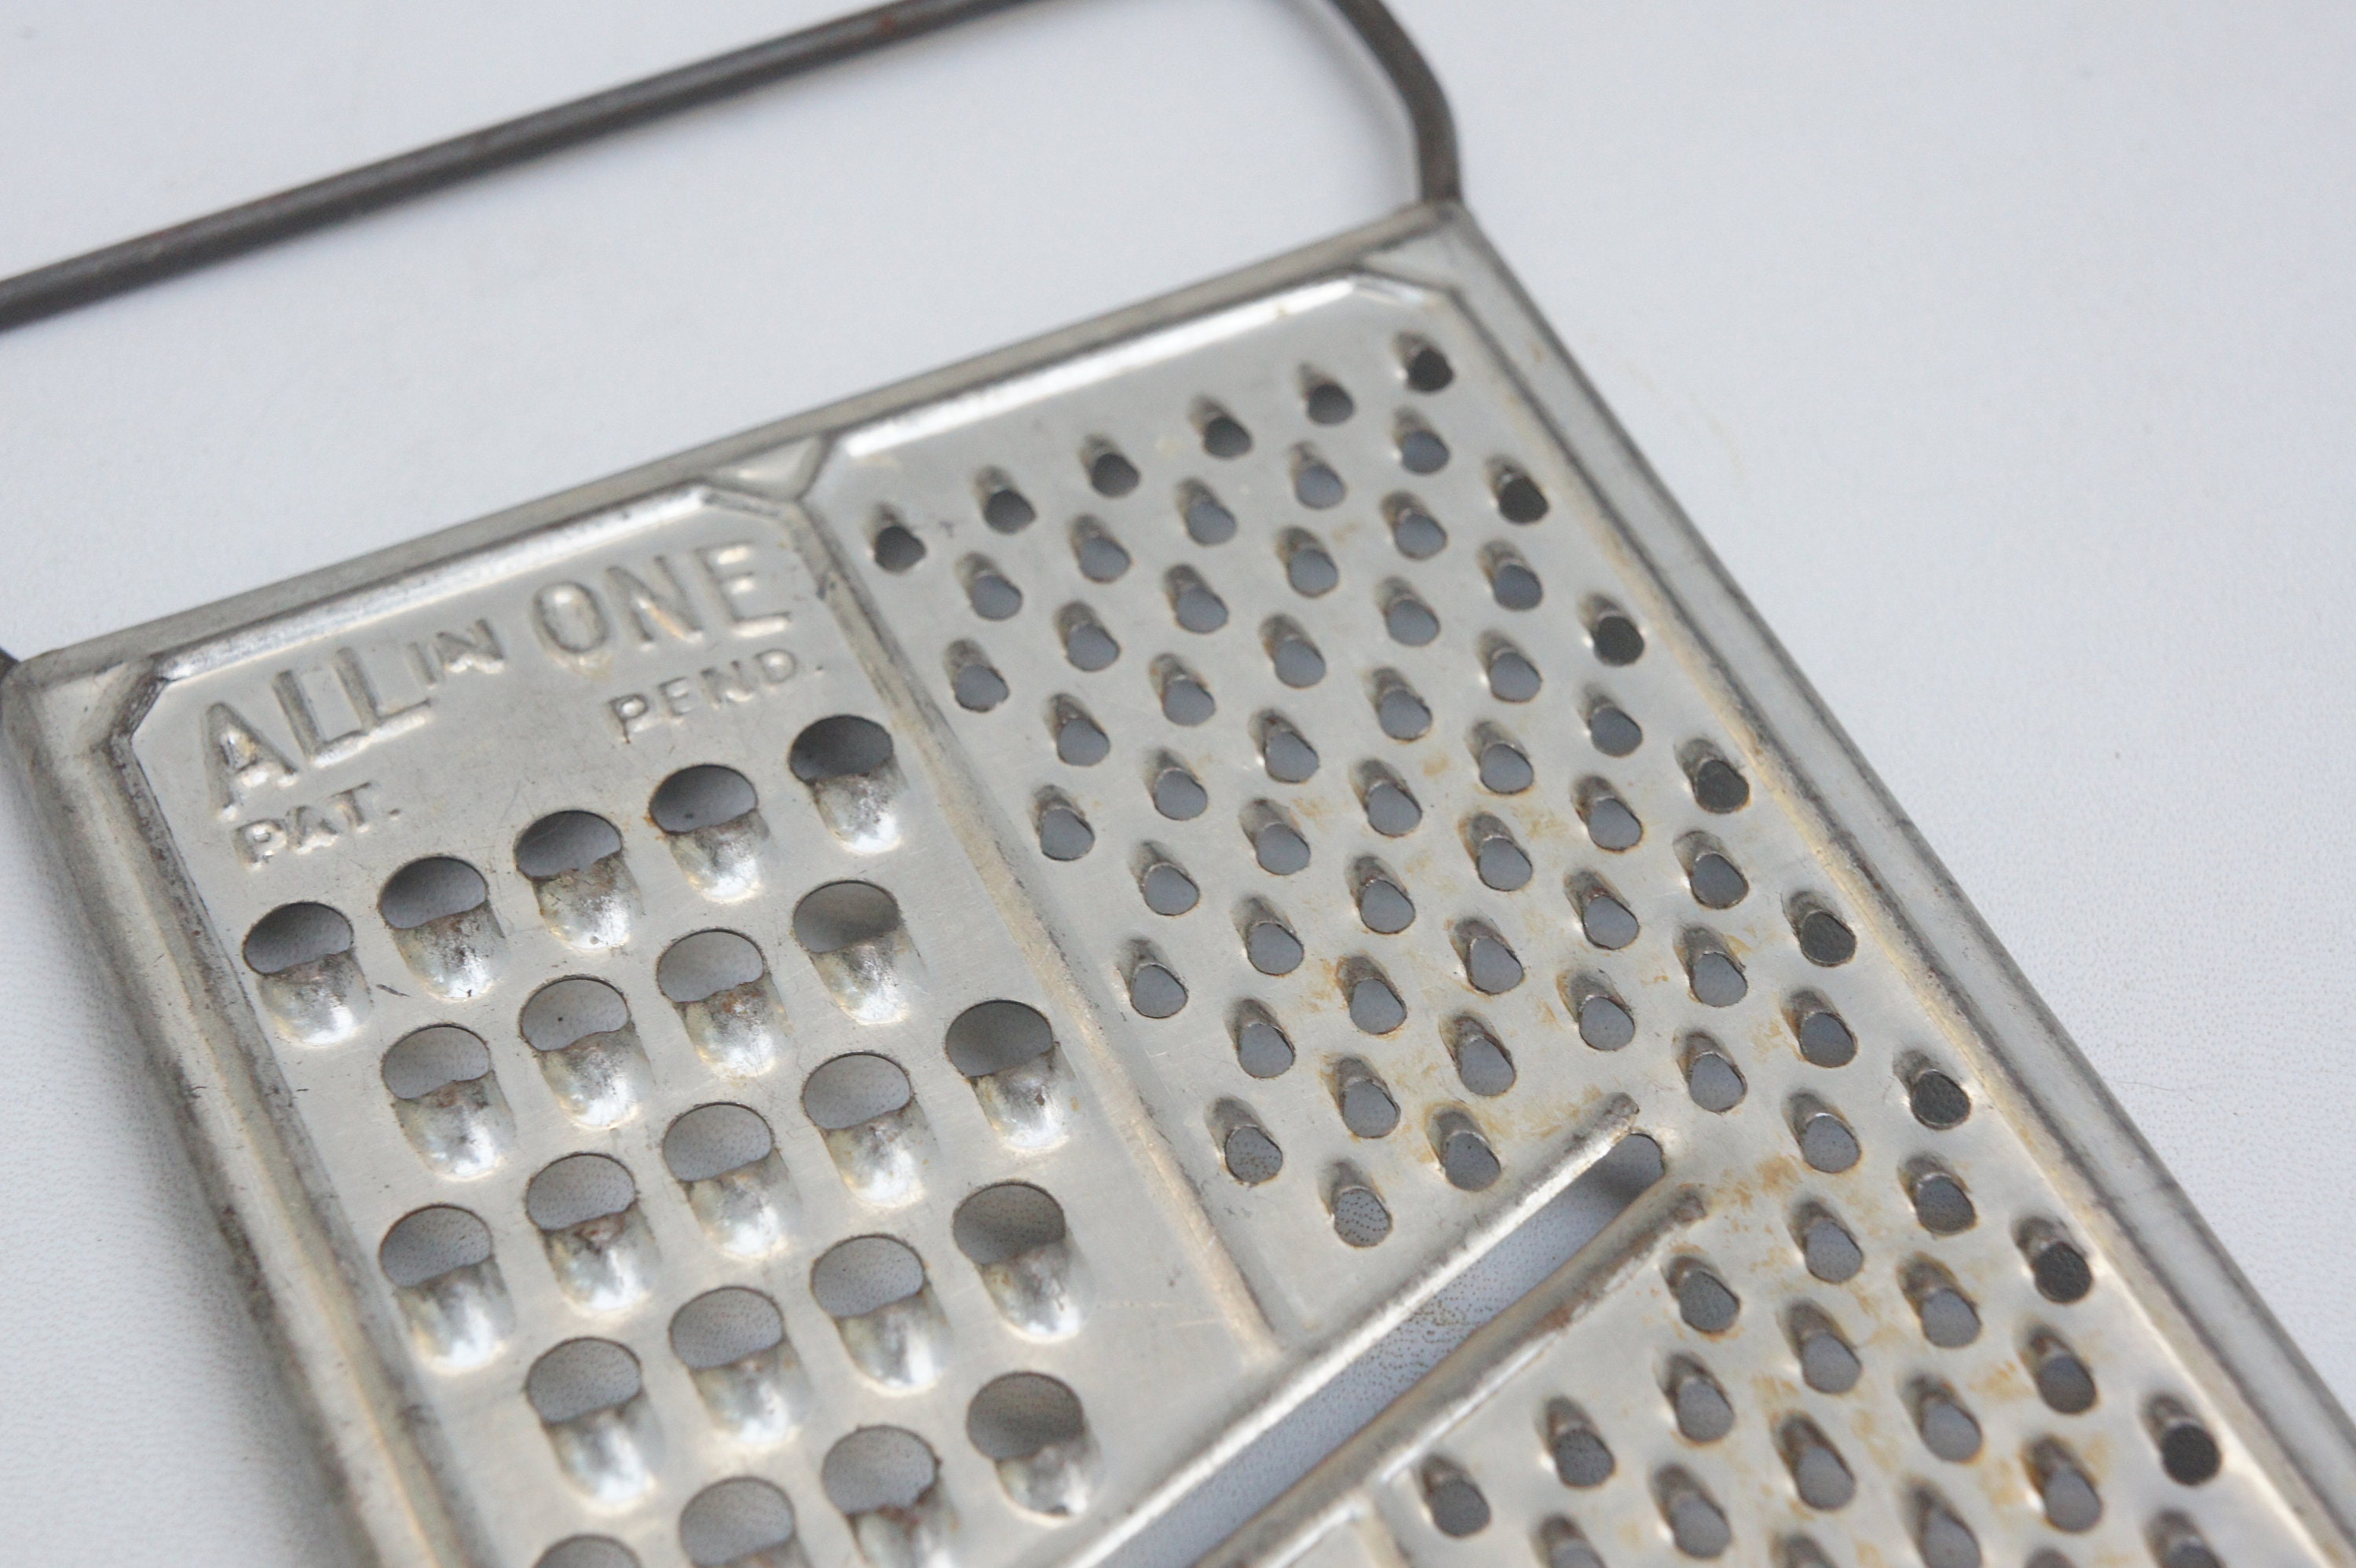 Vintage All In One Metal Flat Cheese Grater Rustic